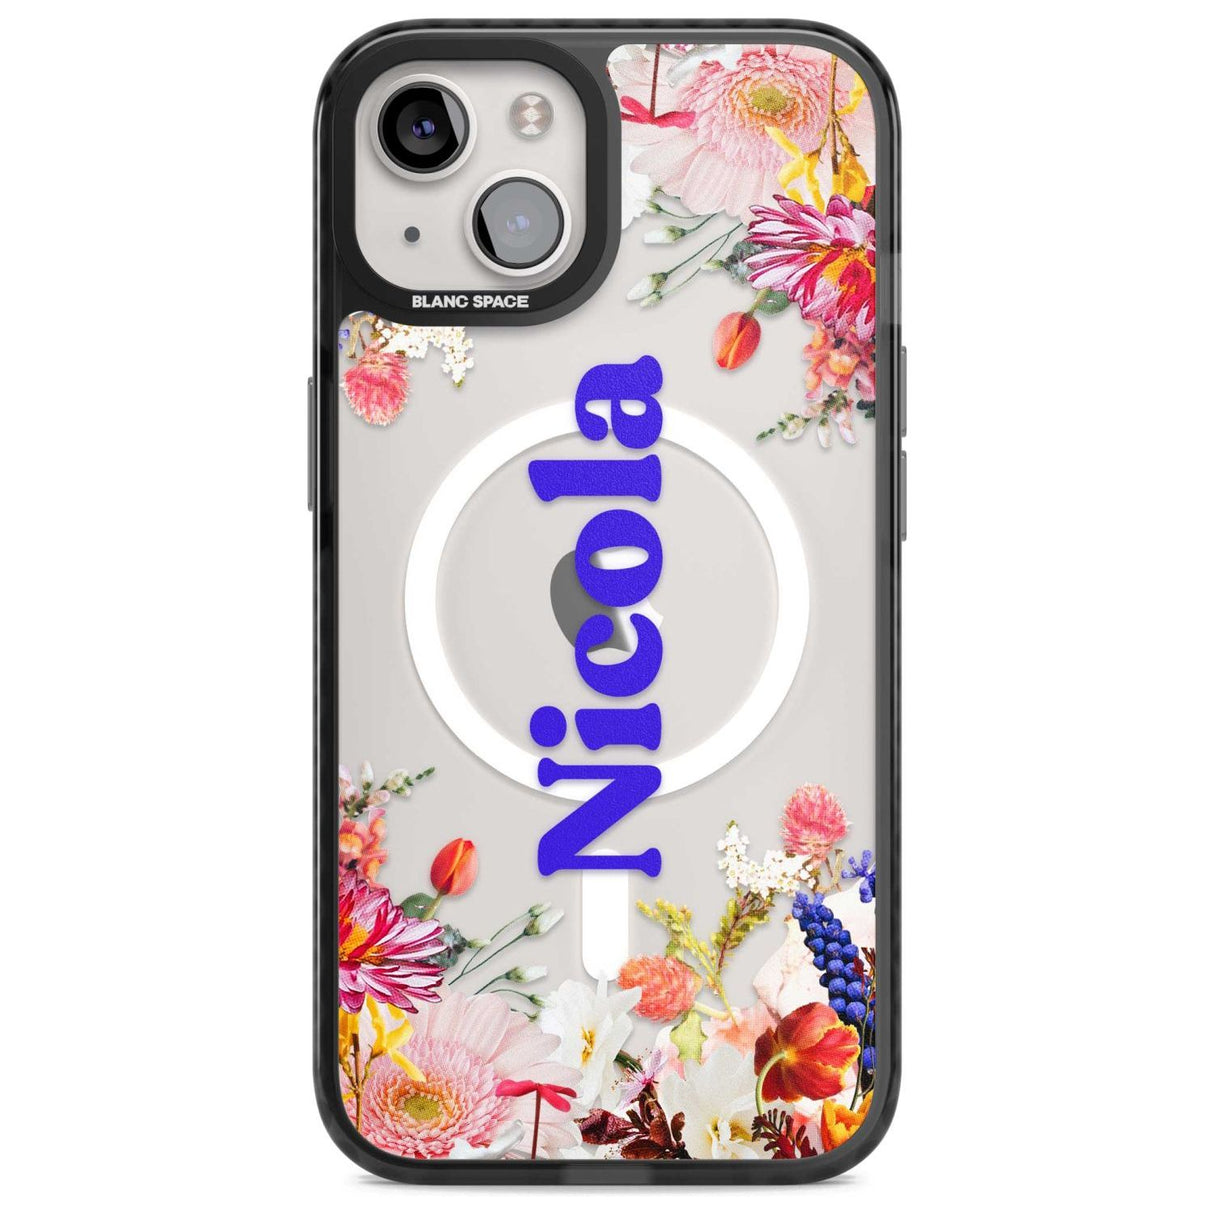 Personalised Text with Floral Borders Custom Phone Case iPhone 15 Plus / Magsafe Black Impact Case,iPhone 15 / Magsafe Black Impact Case,iPhone 14 Plus / Magsafe Black Impact Case,iPhone 14 / Magsafe Black Impact Case,iPhone 13 / Magsafe Black Impact Case Blanc Space